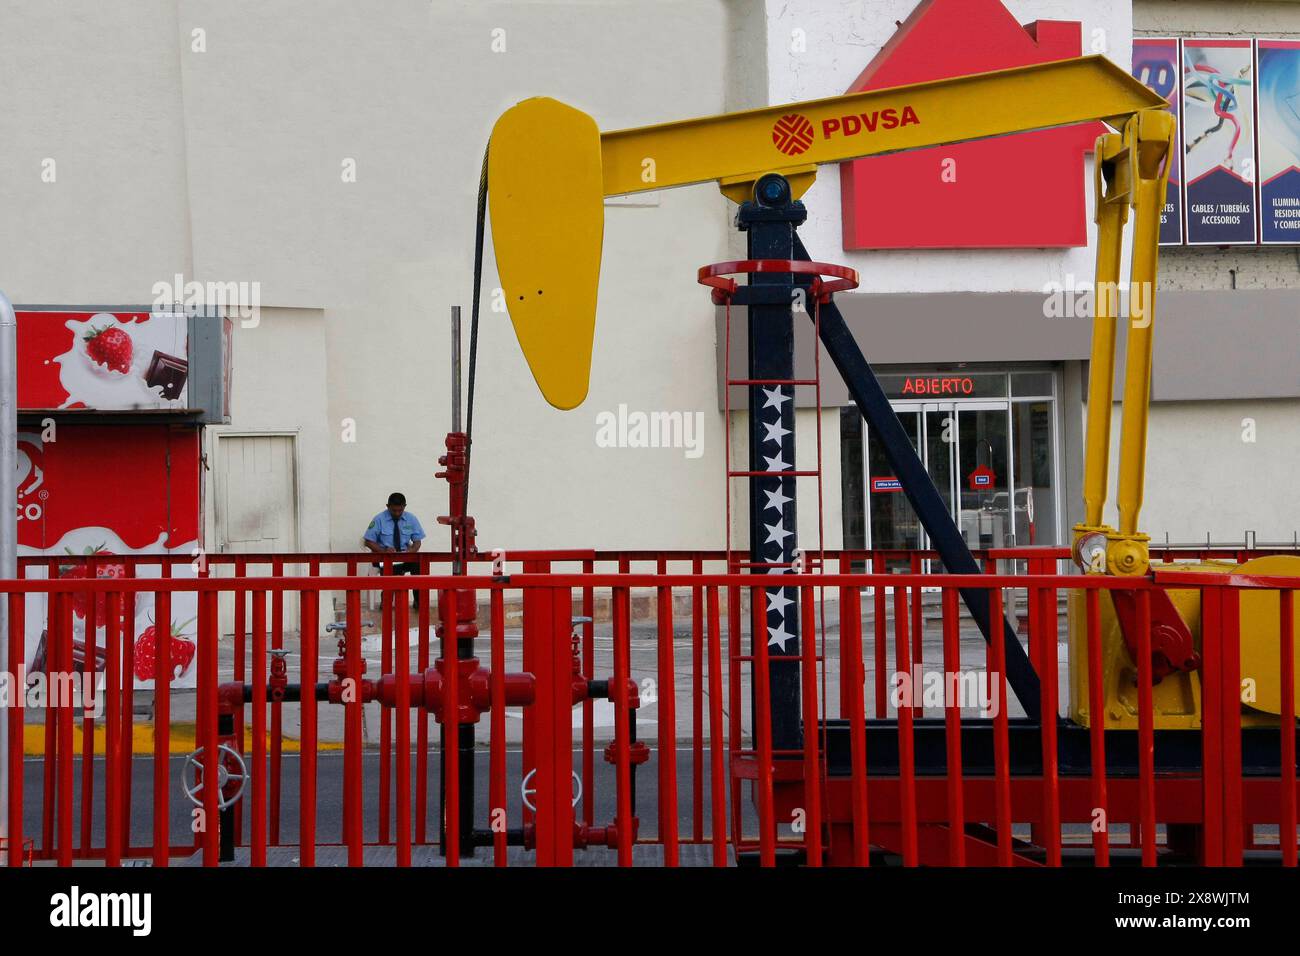 Maracaibo, Venezuela. 14-11-2010. An Pump oil and oil tanke are seen on the street of Capital oil State  of Veenzuela. Photo by: Jose I. Bula. Stock Photo